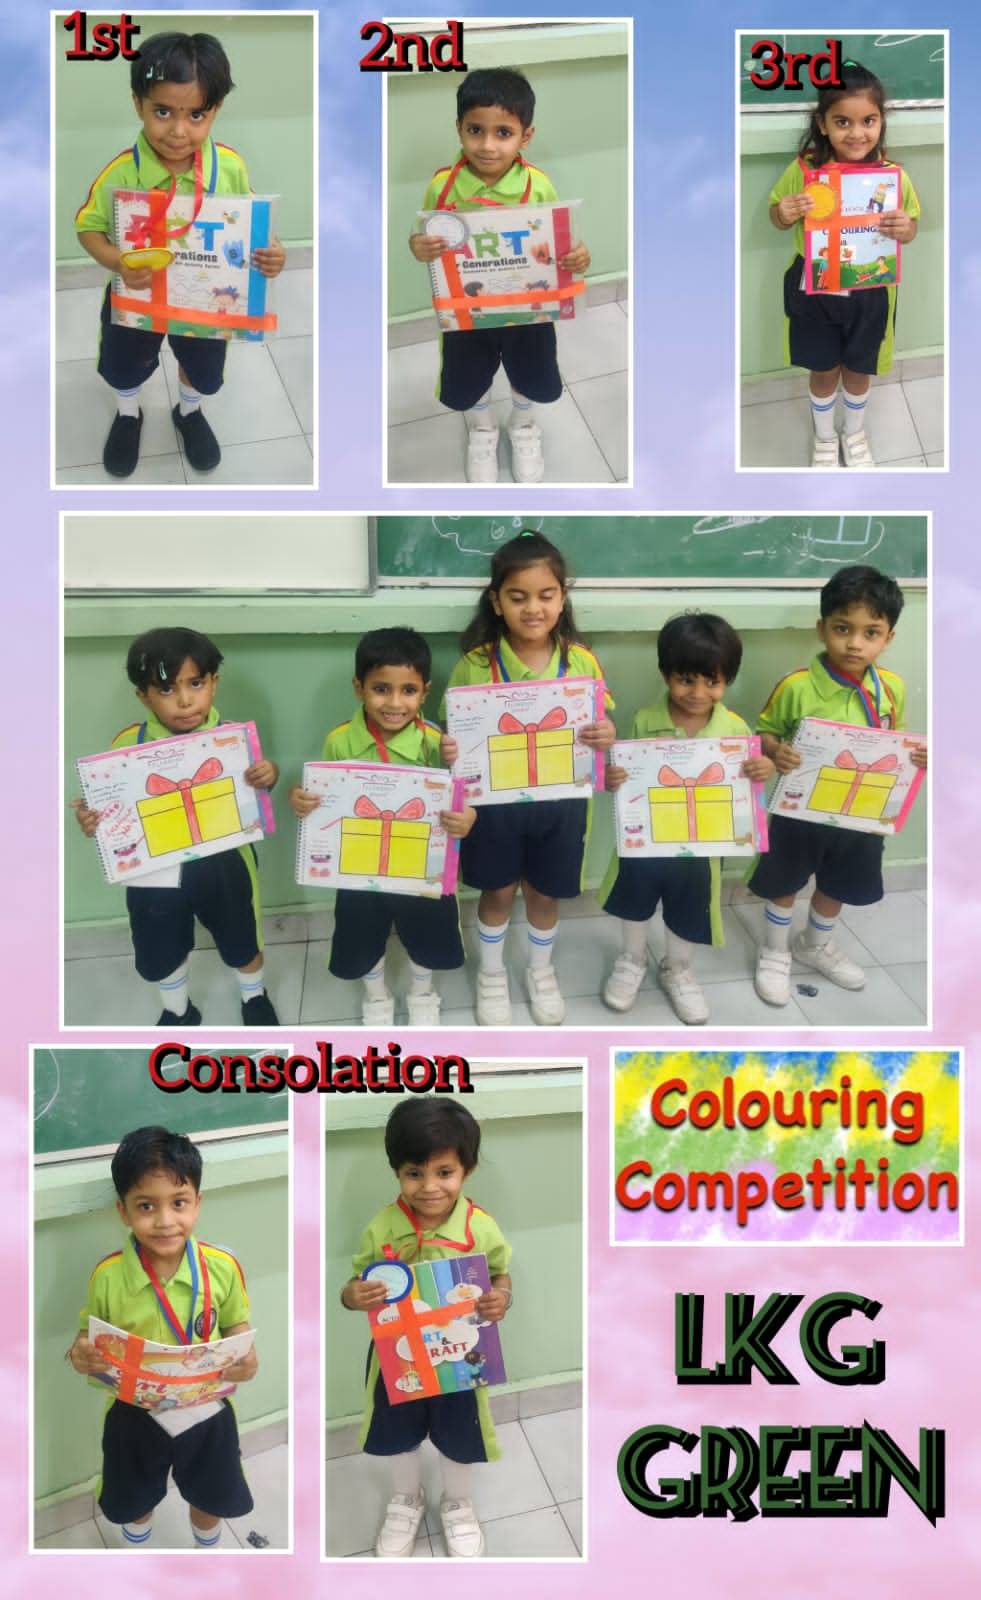 Colouring competition of class LKG